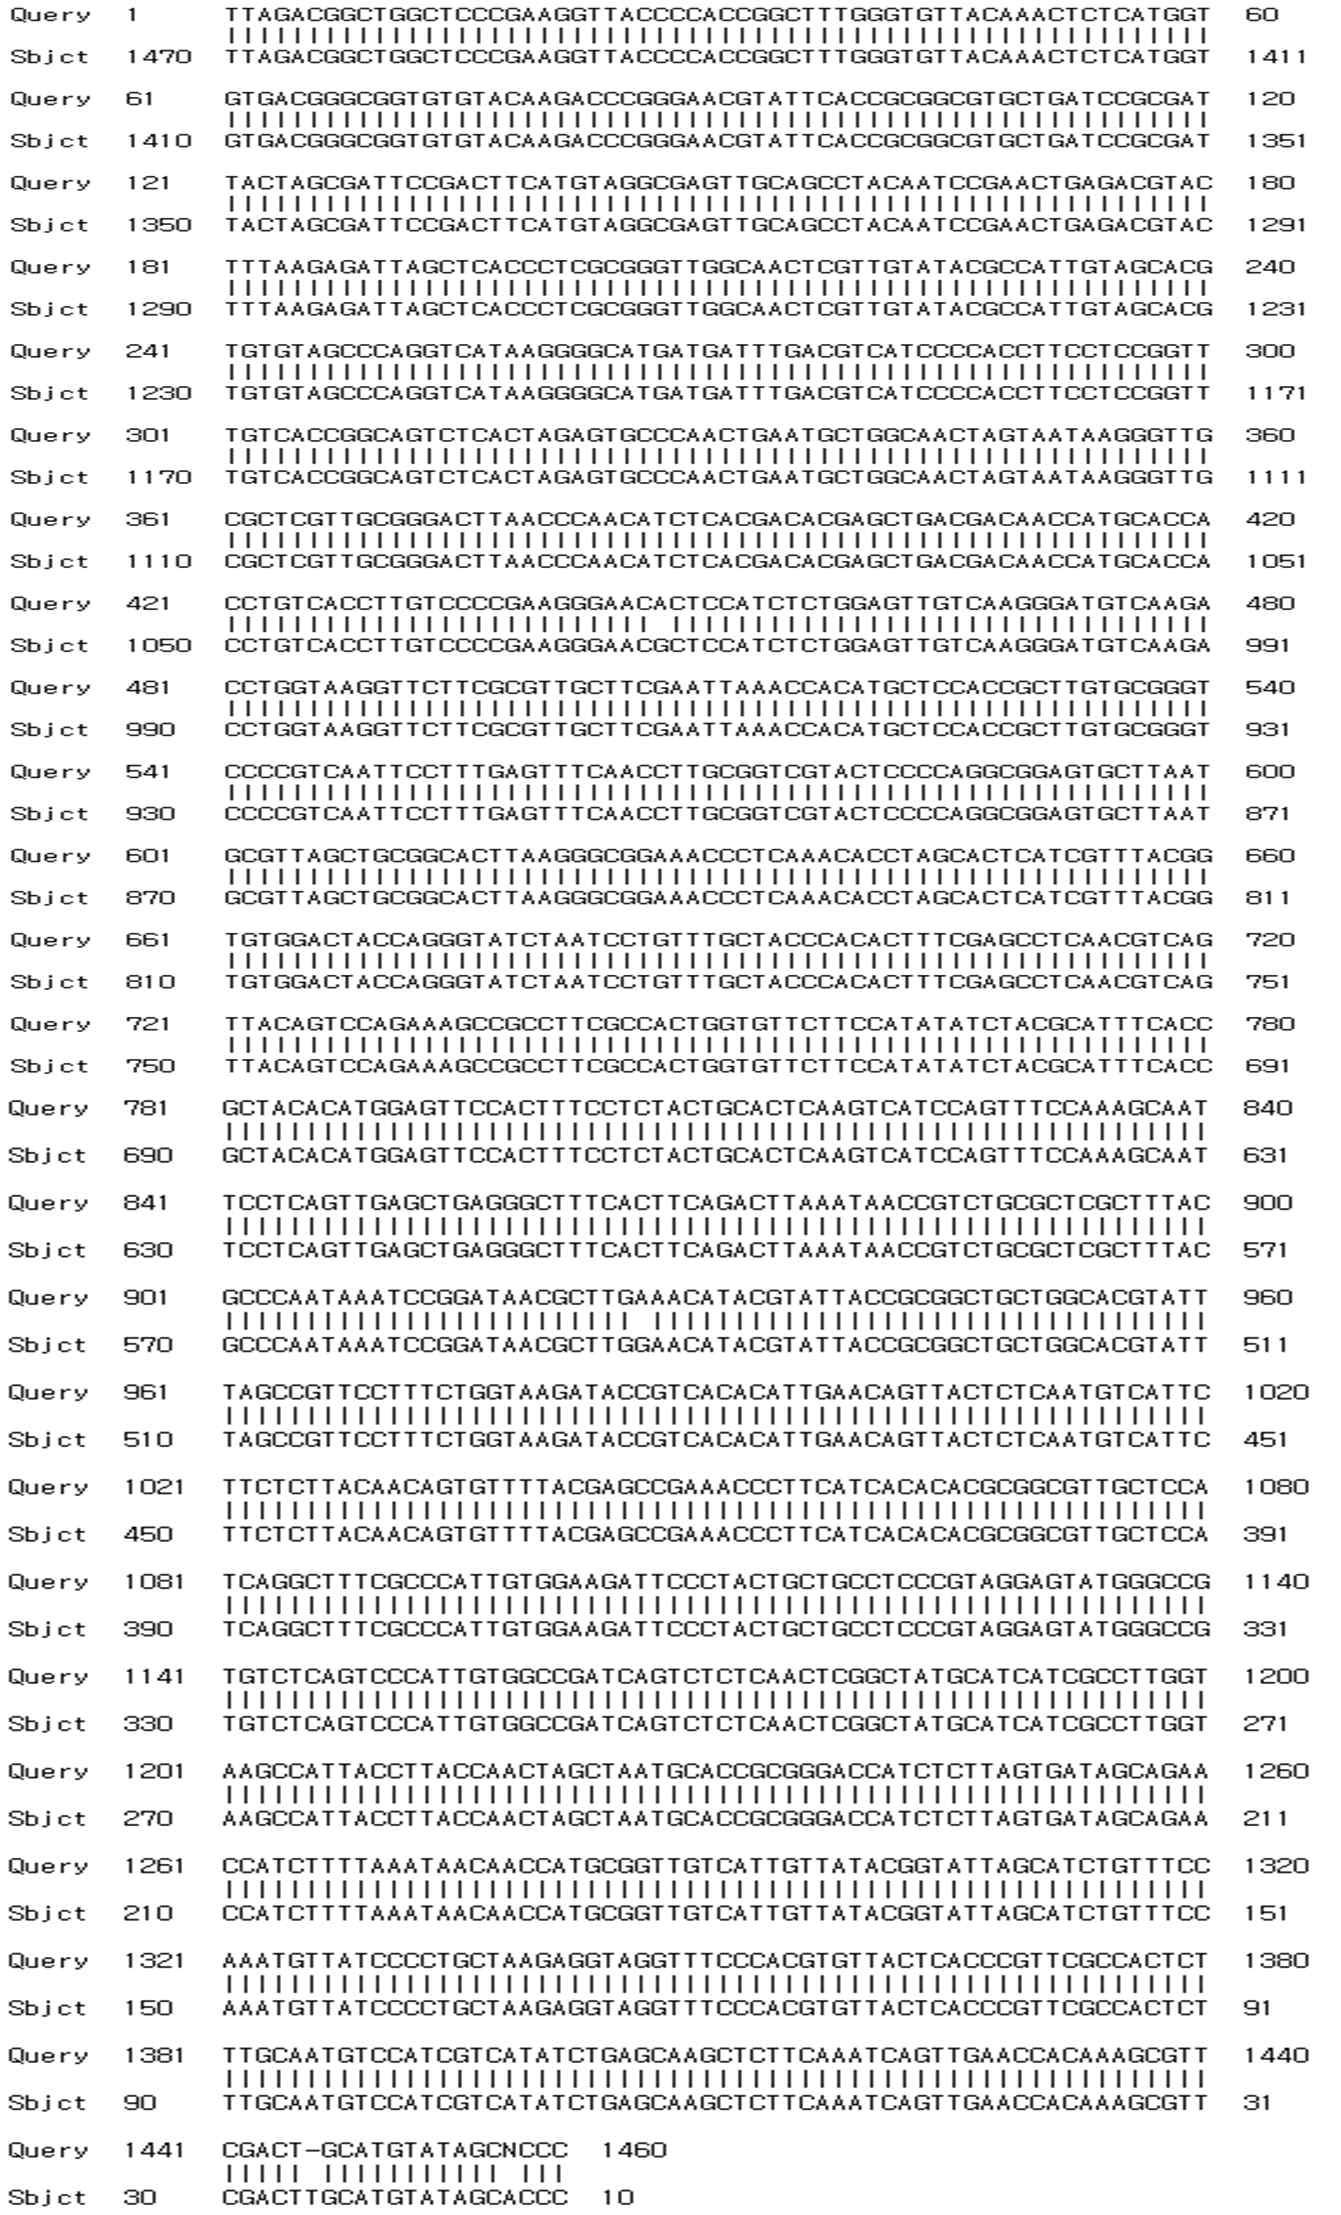 16S rRNA sequencing of F-13 strain